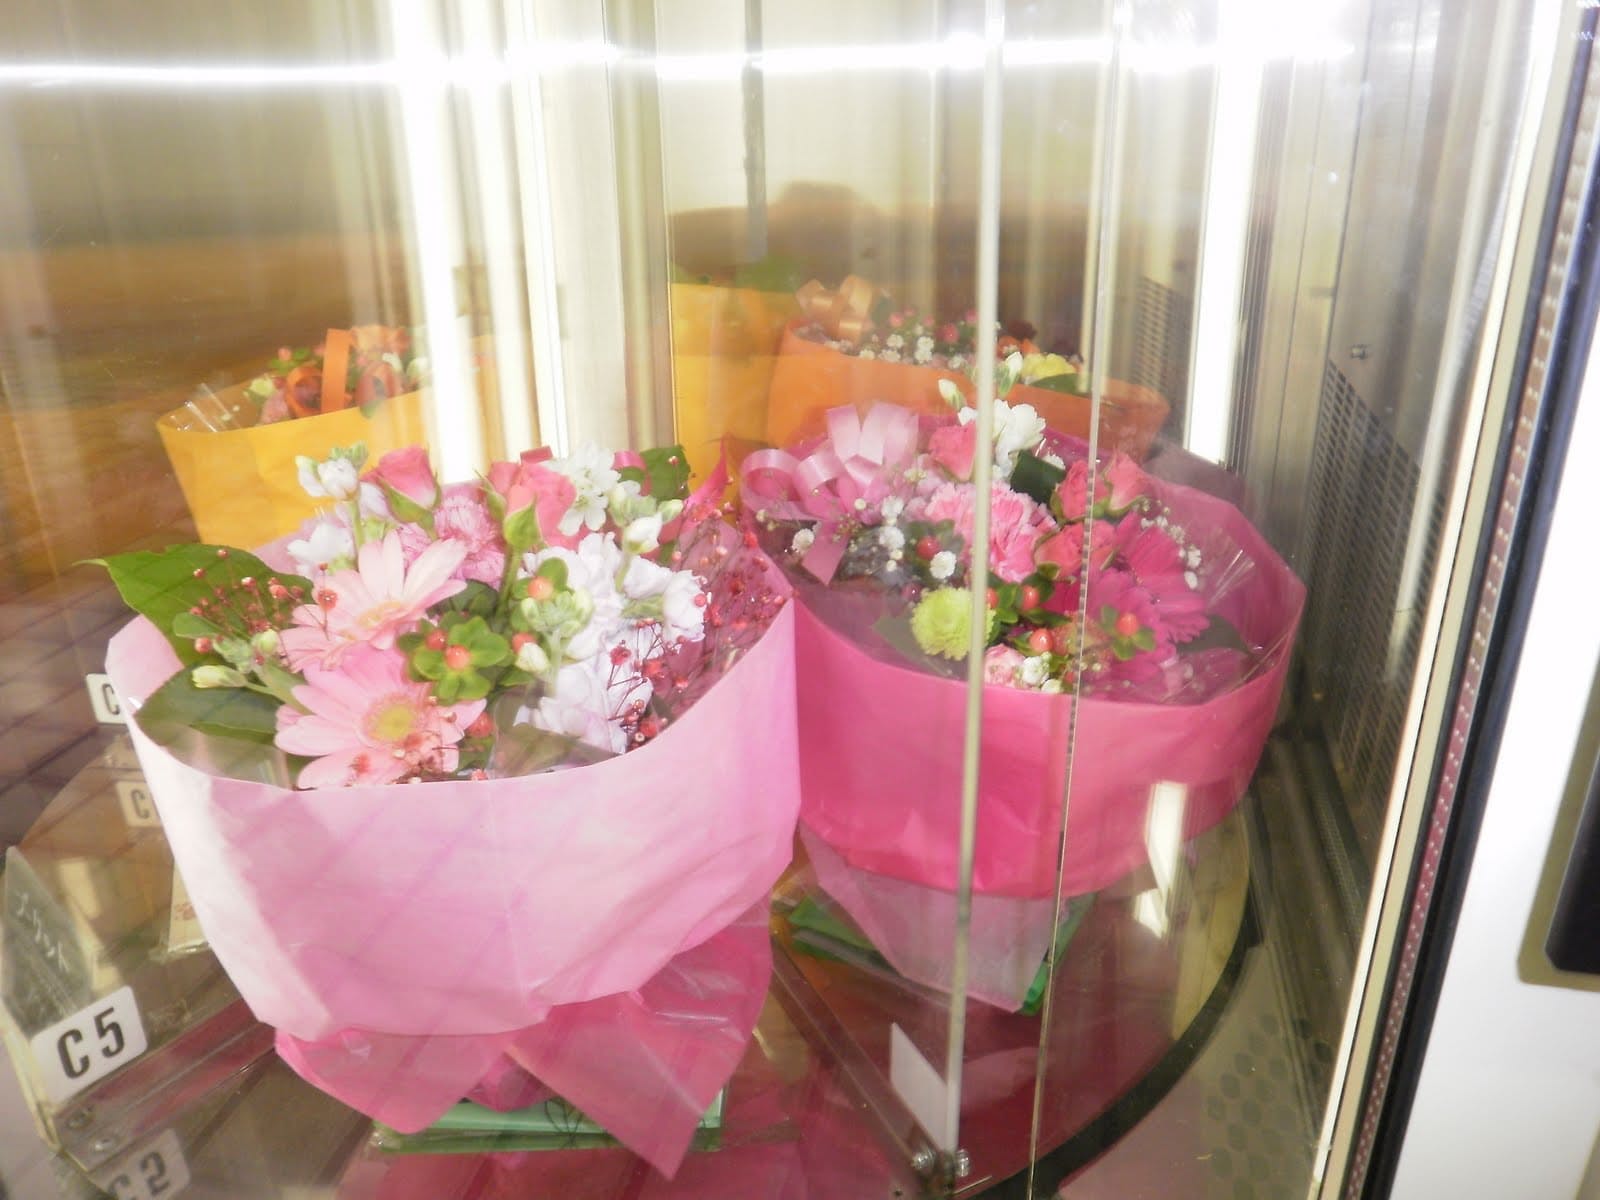 Flowers. Got in trouble with the wife, but it's late and everything is closed? For guys like you there are vending machines with flowers. Opened 24/7 and without questions like "what did you say this time?"..